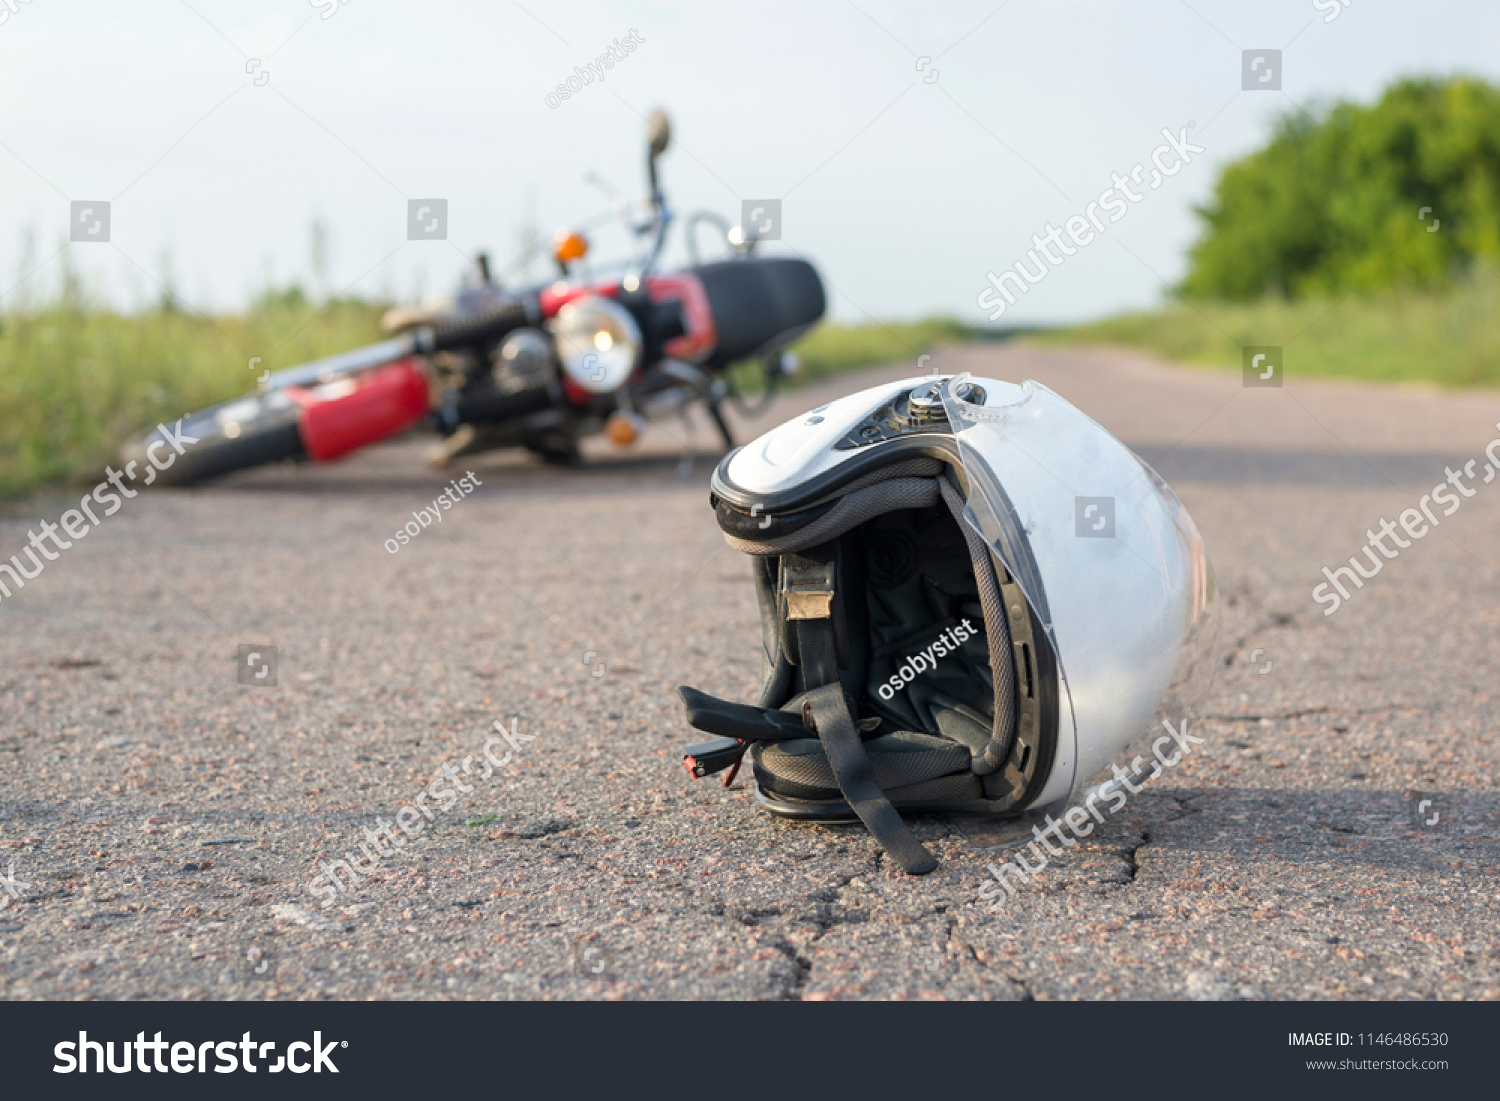 Photo of helmet and motorcycle on road, the concept of road accidents #1146486530